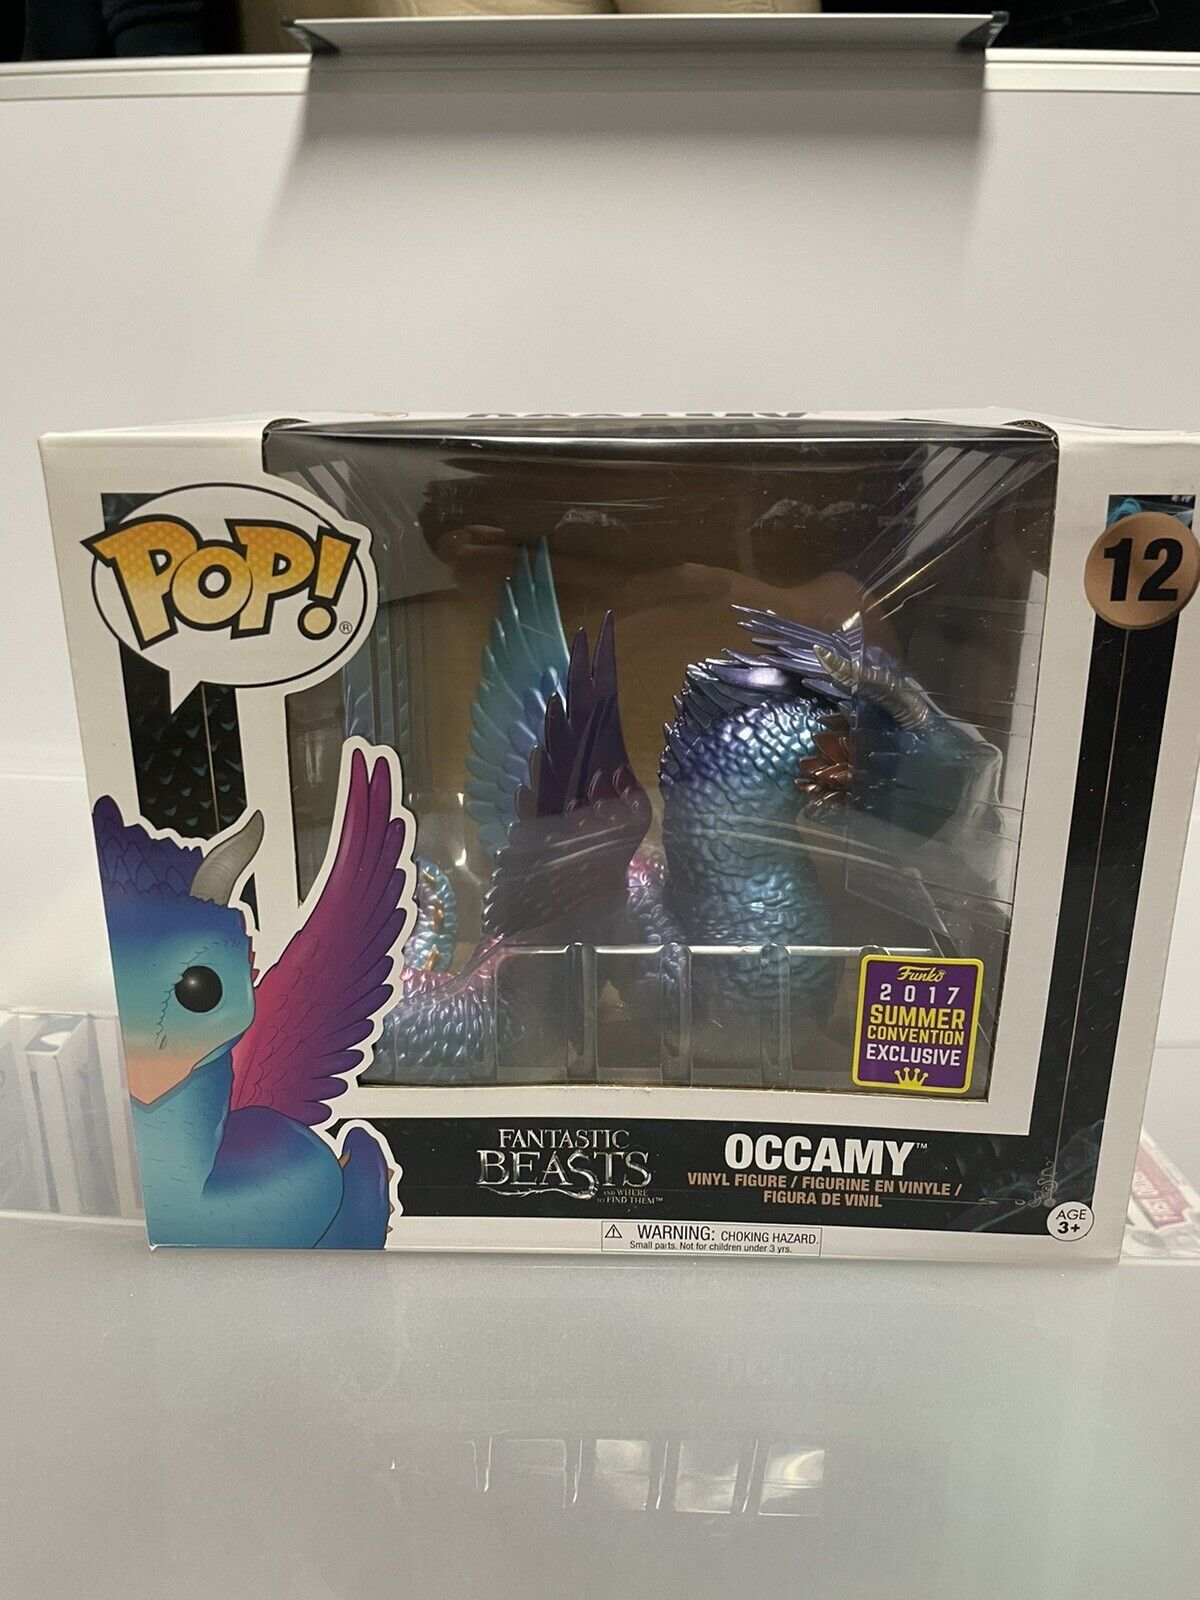 Funk Pop Occamy 12 Fantastic Beasts 2017 Summer Convention Exclusive